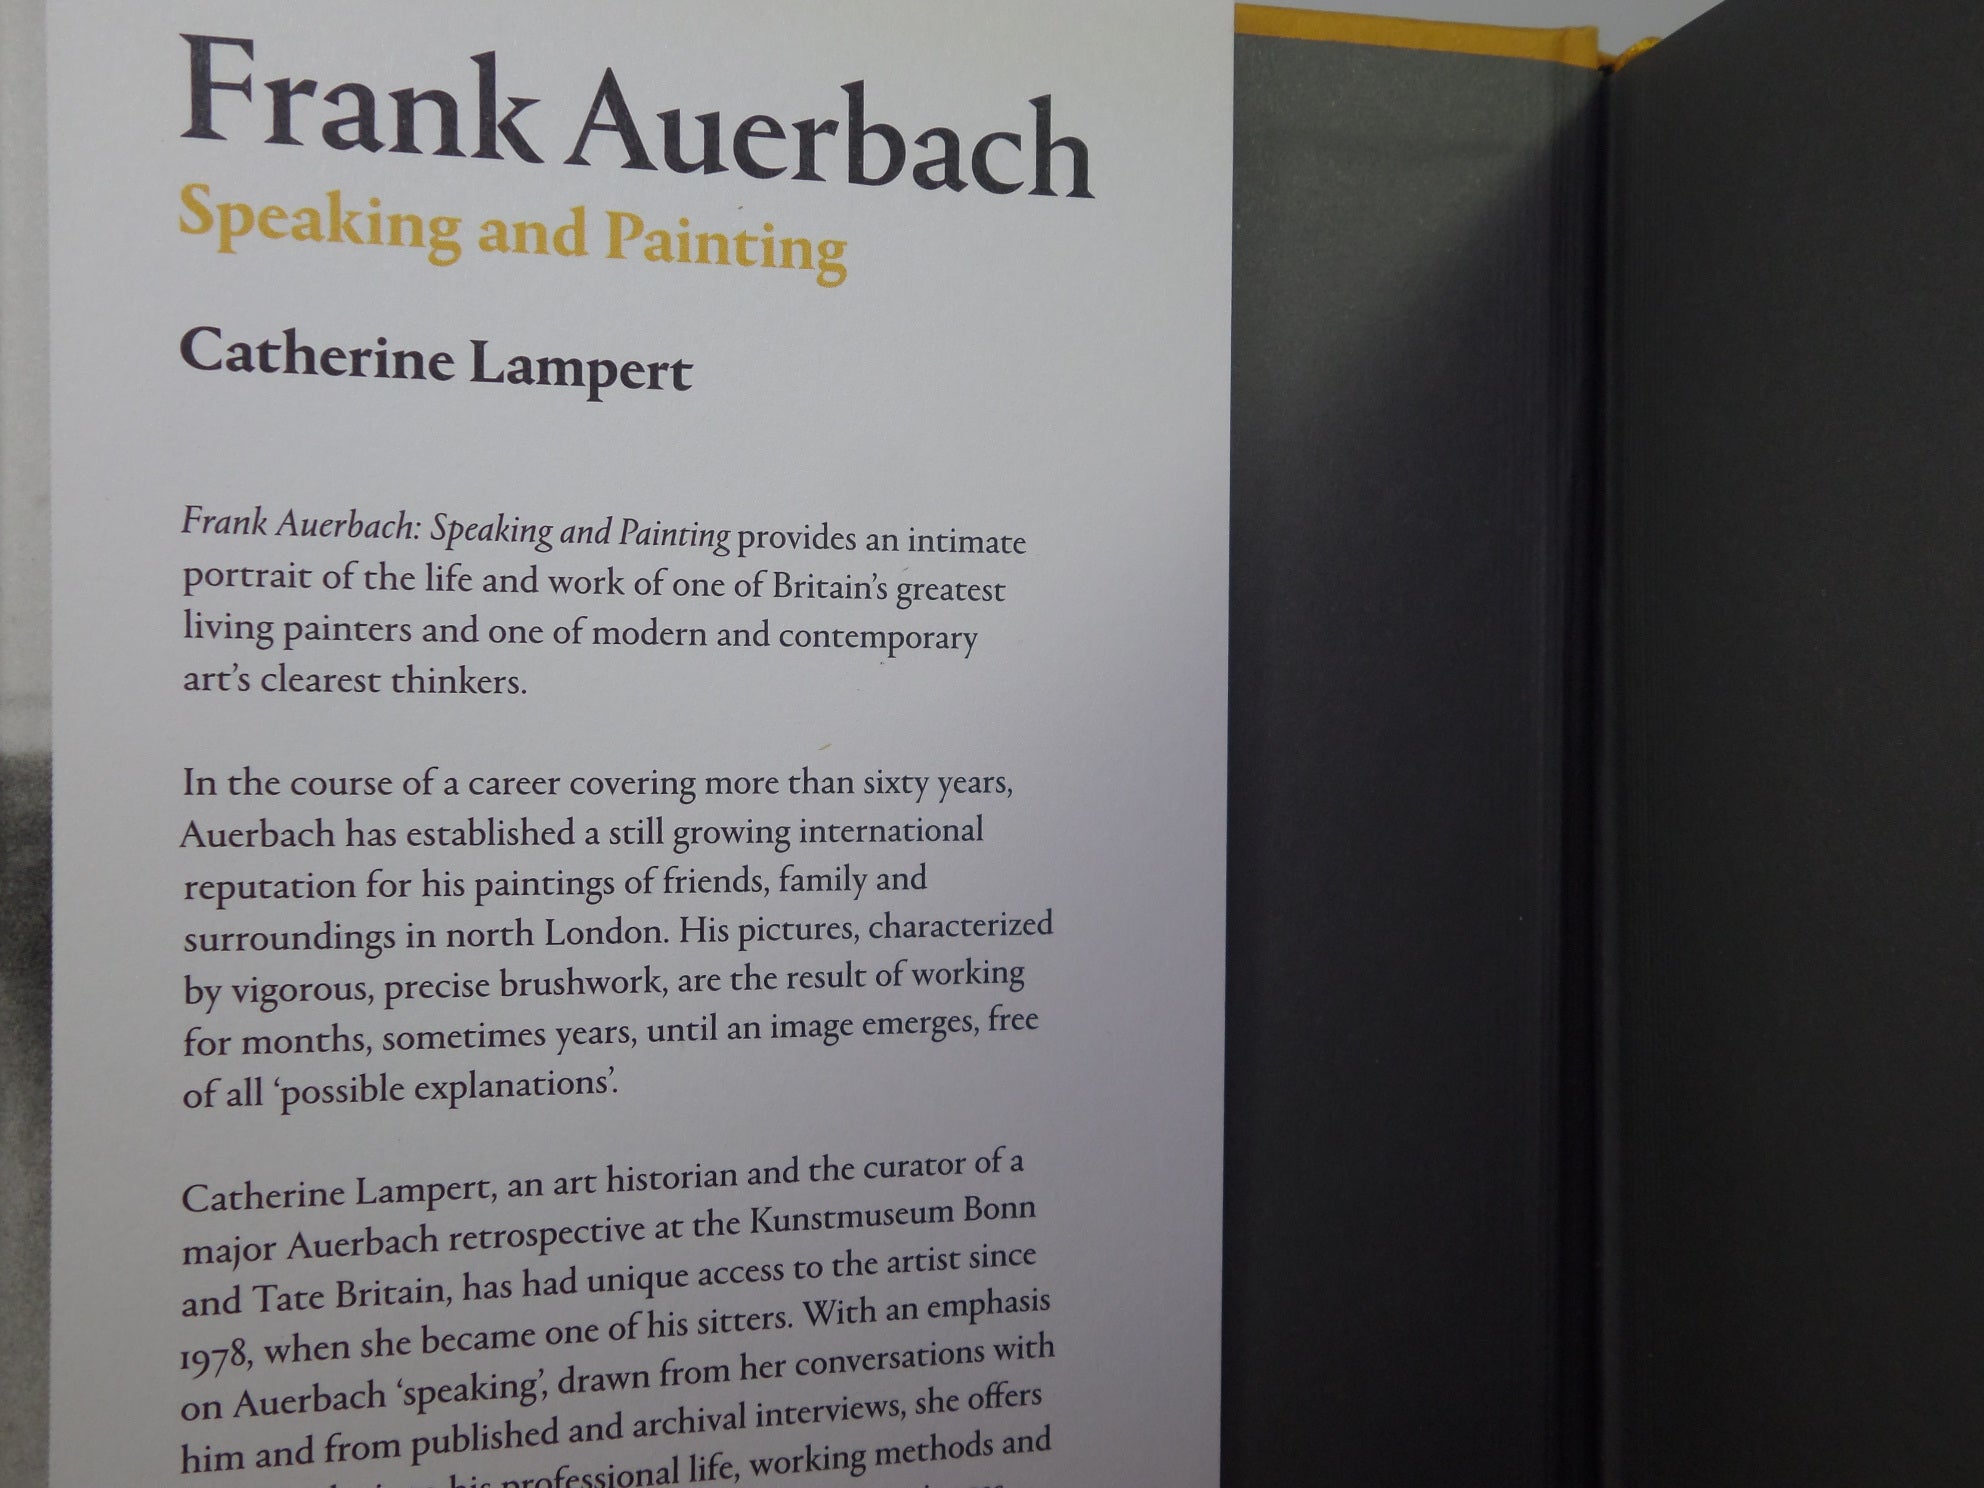 FRANK AUERBACH: SPEAKING AND PAINTING BY CATHERINE LAMPERT 2015 SIGNED FIRST EDITION